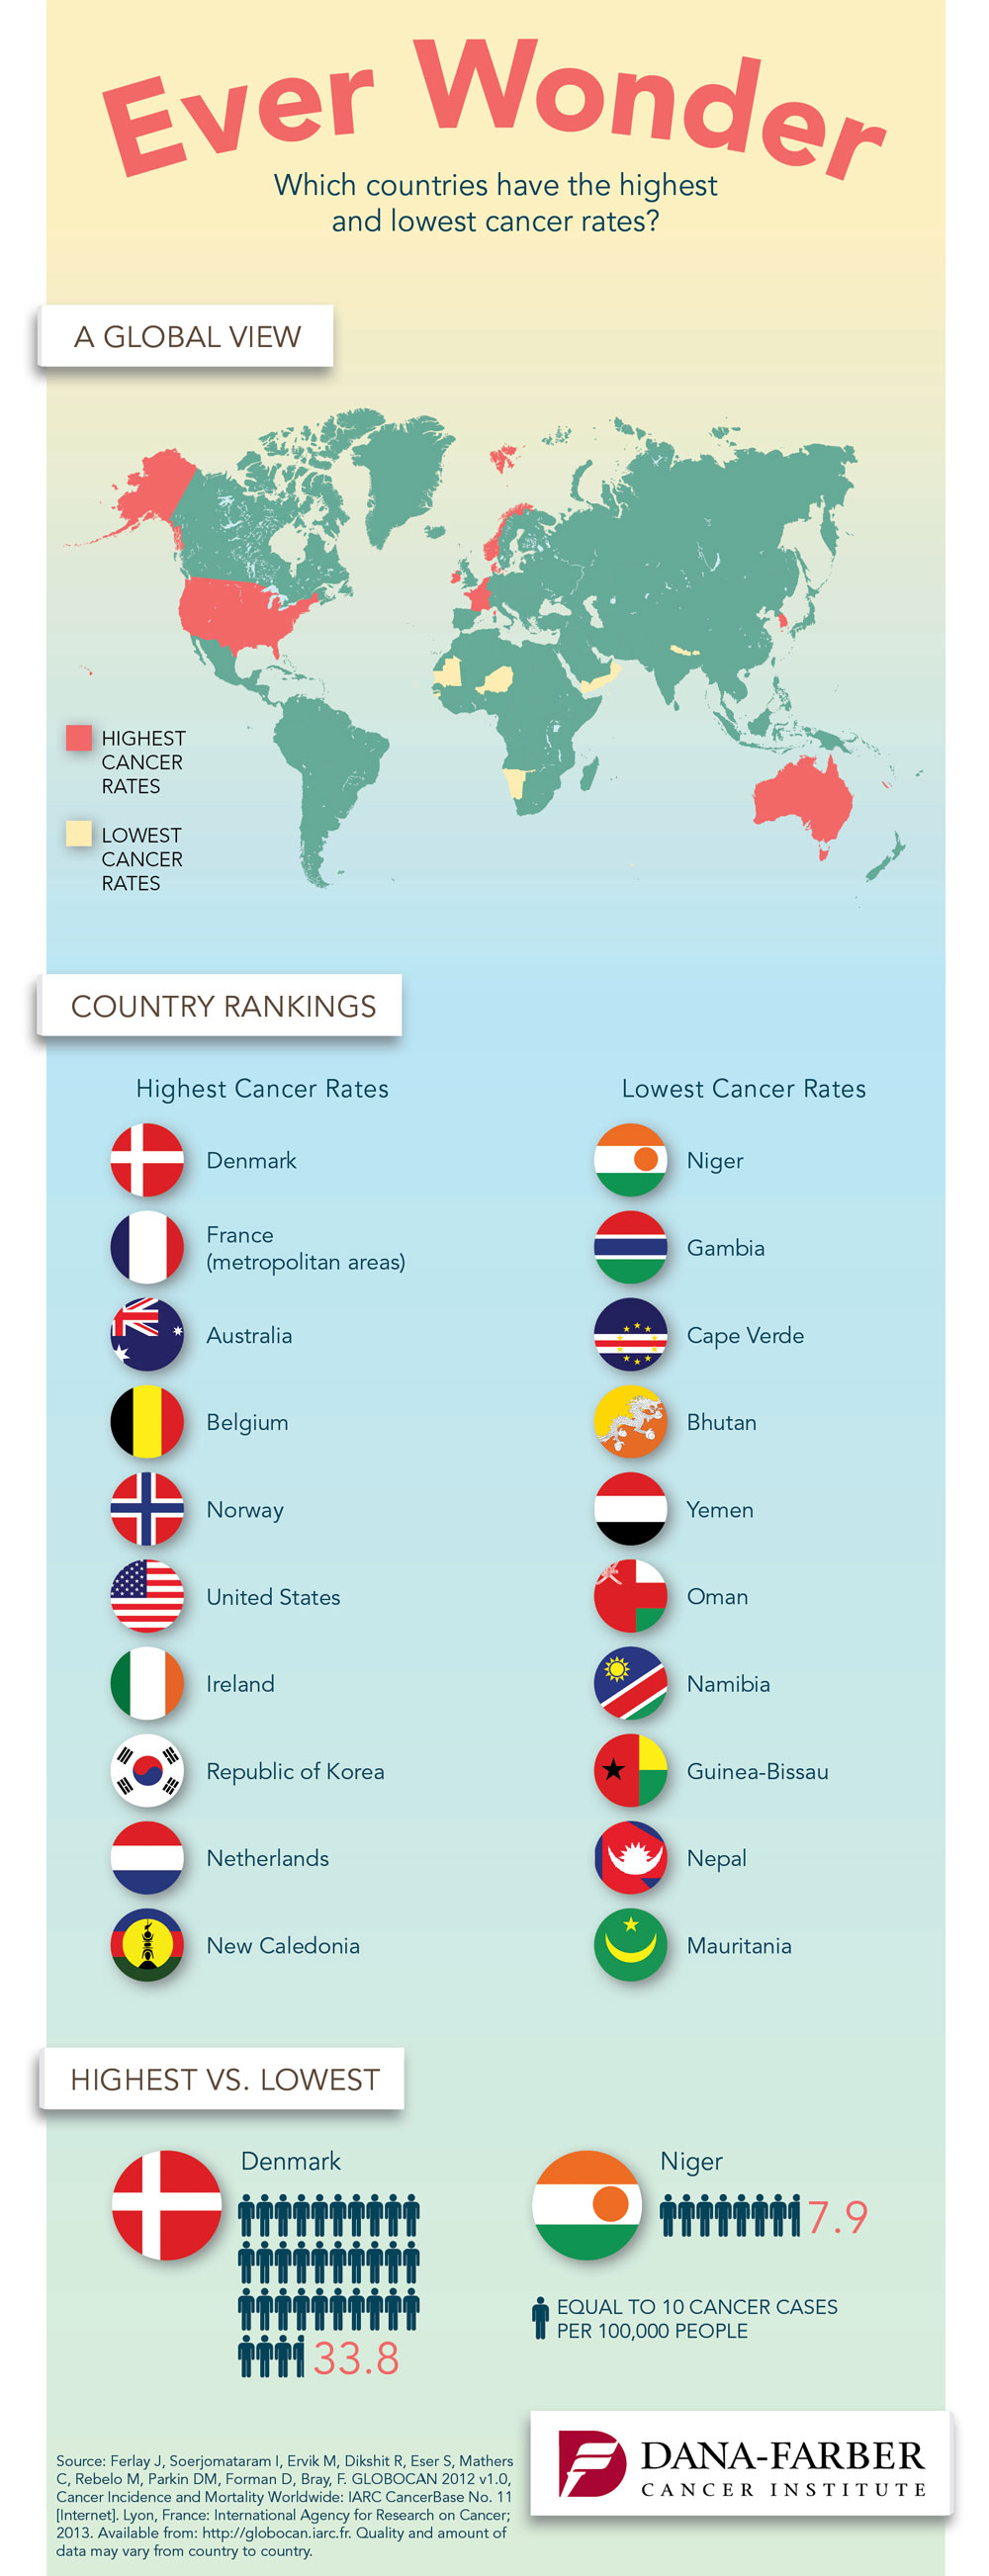 Which Countries Have the Highest and Lowest Cancer Rates